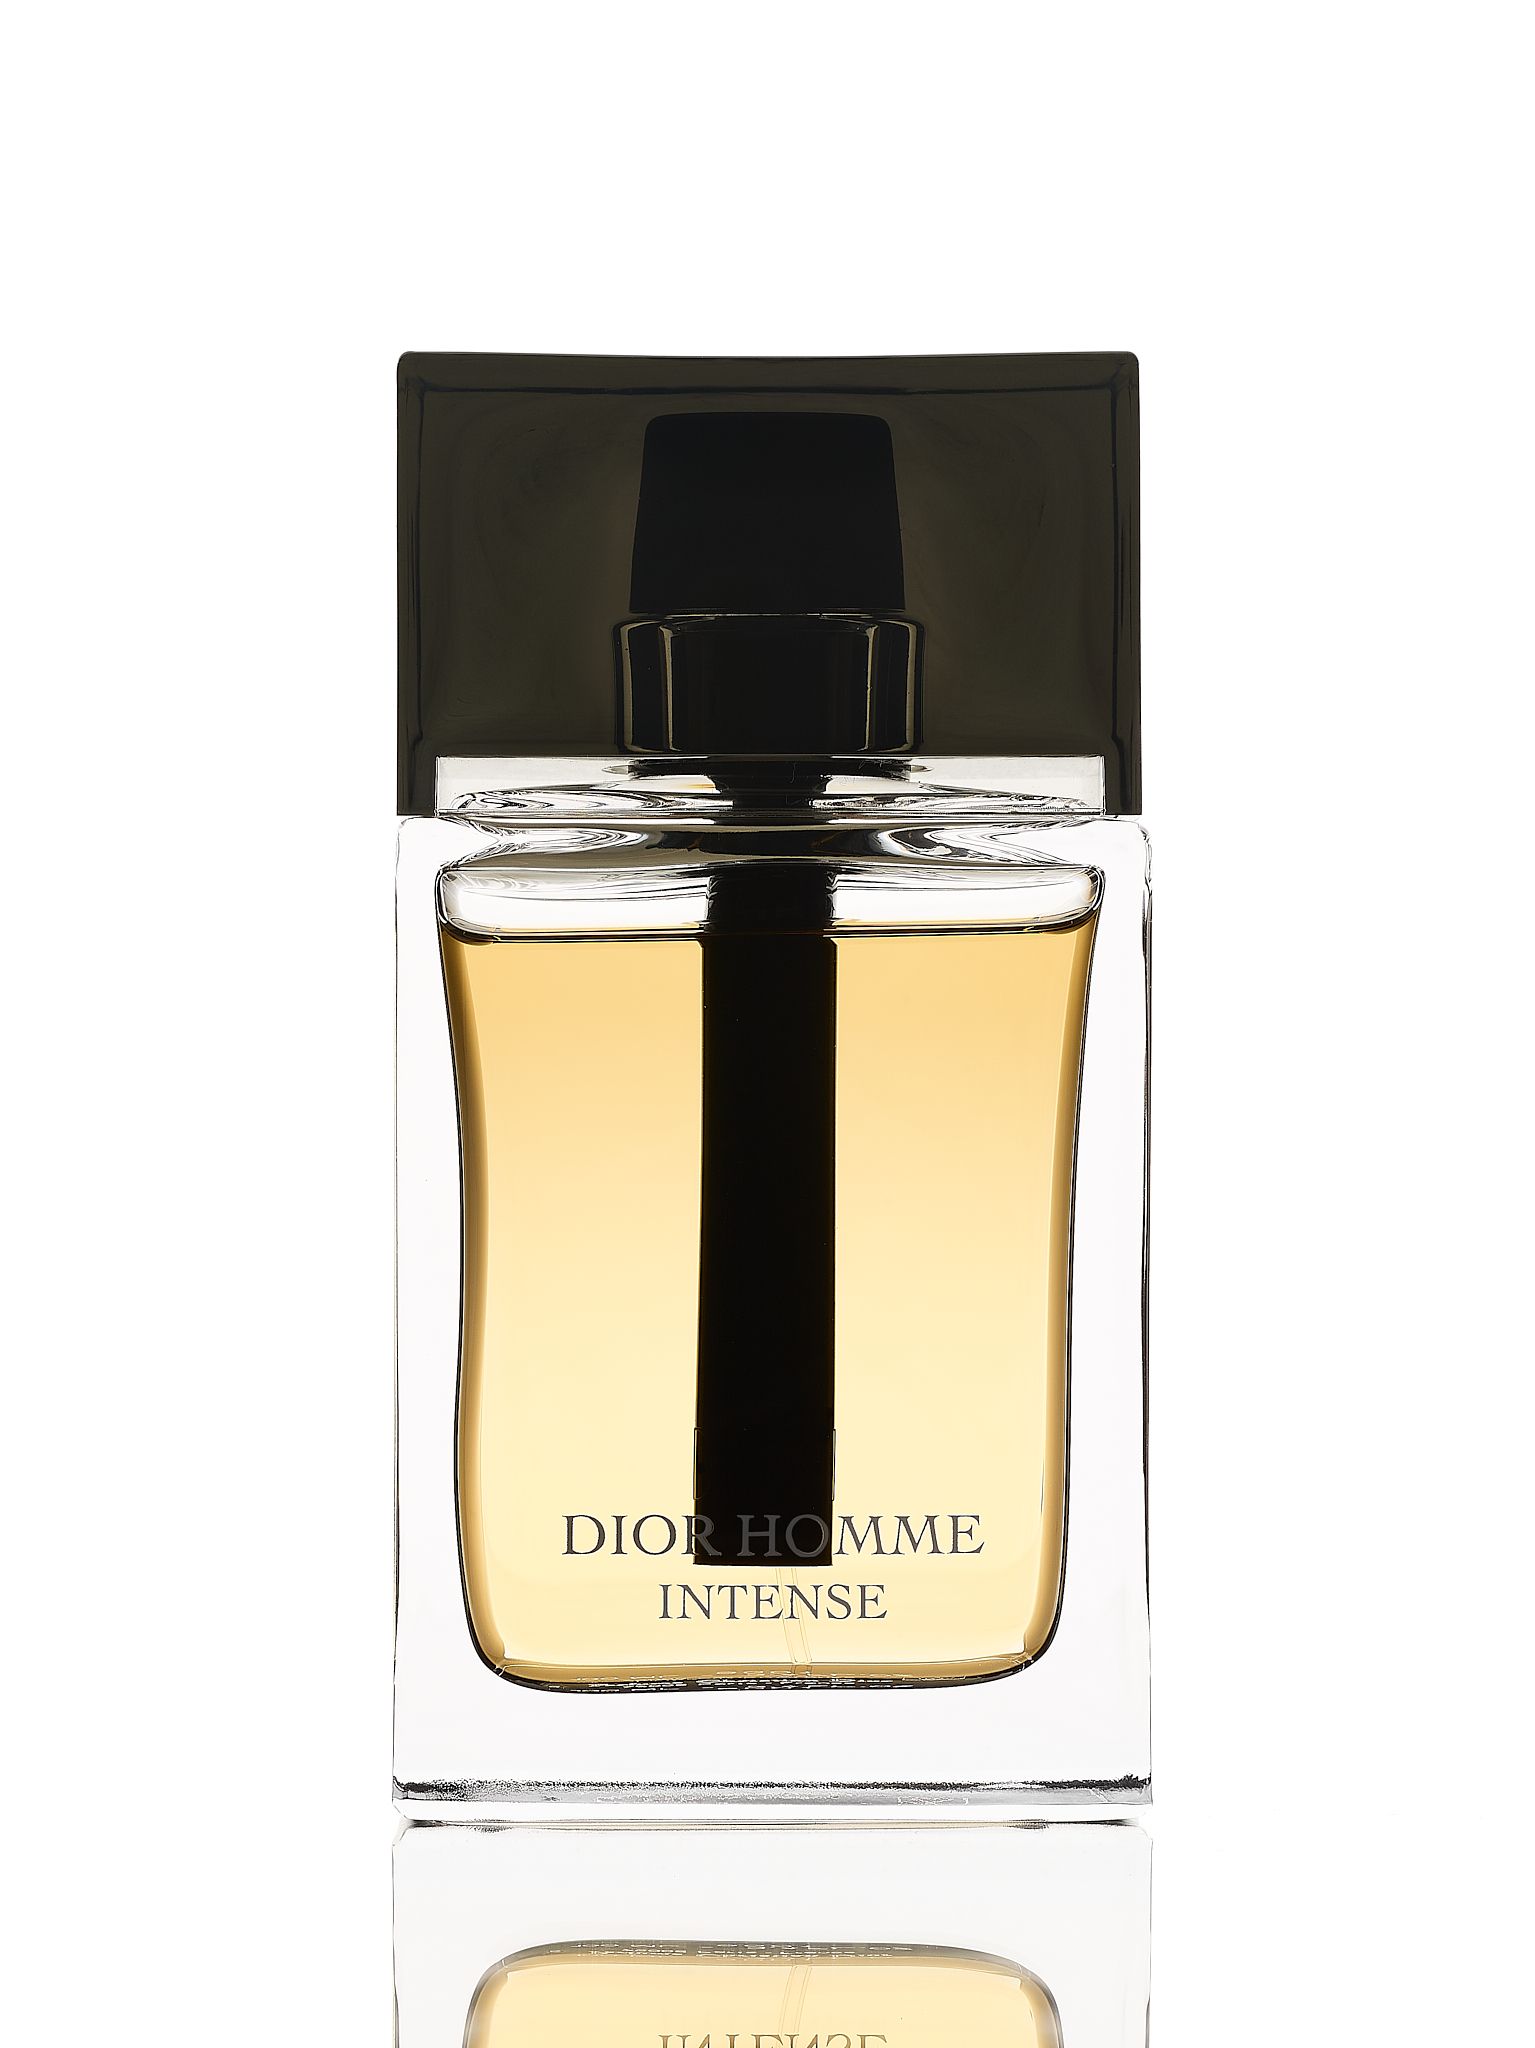 Dior Homme Intense - Pic. 1